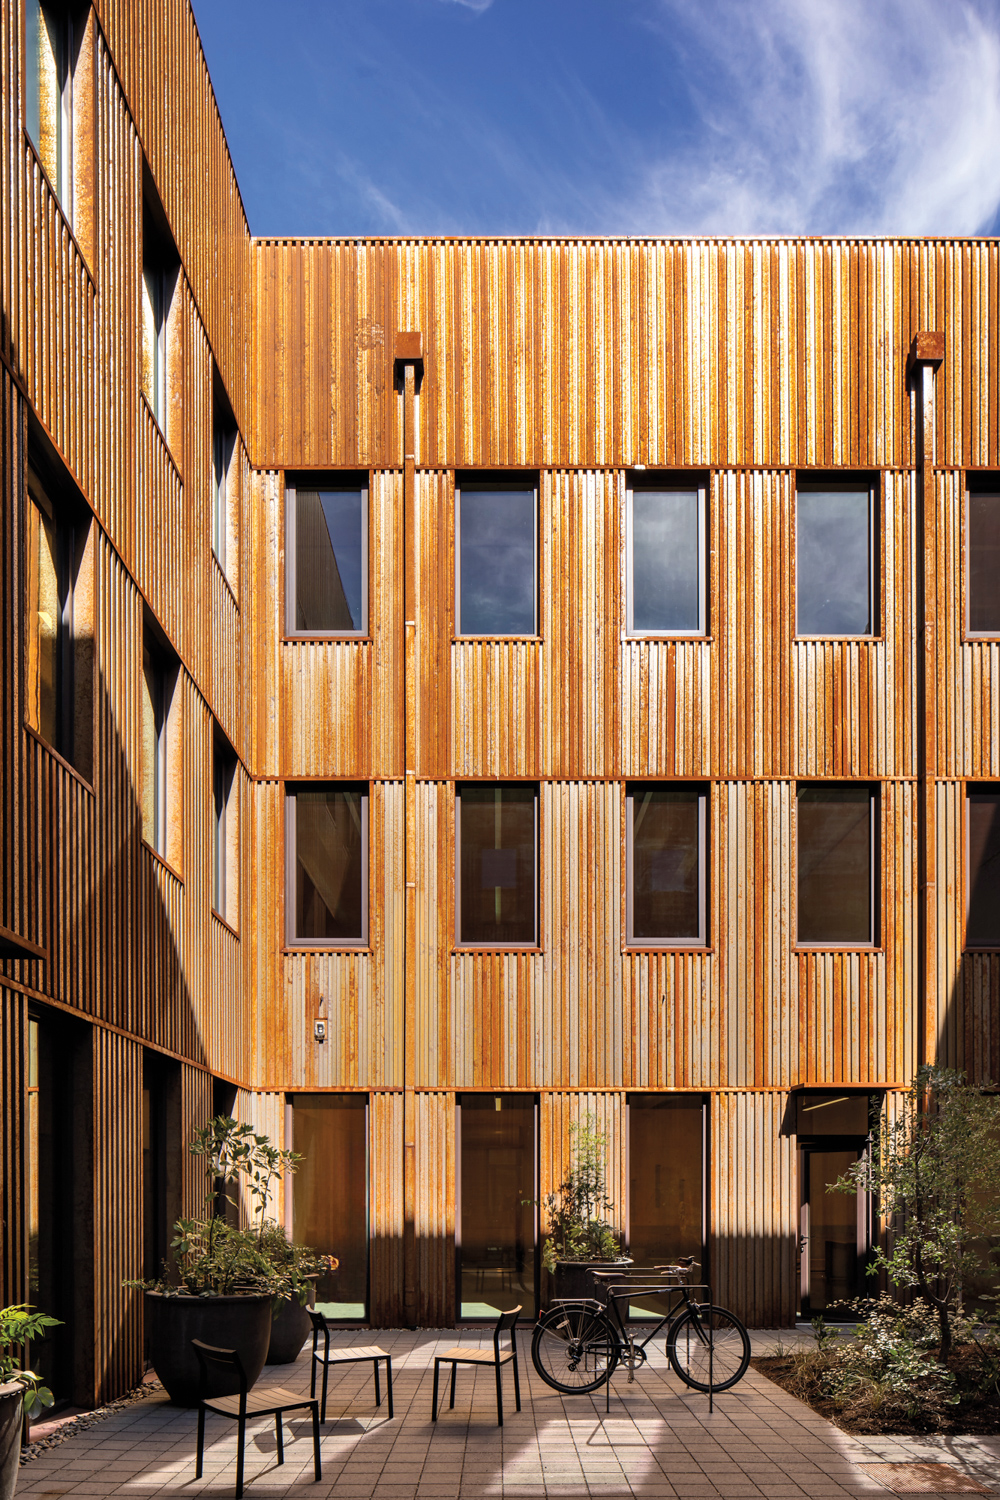 Courtyard of a building made from warm-colored wood panels